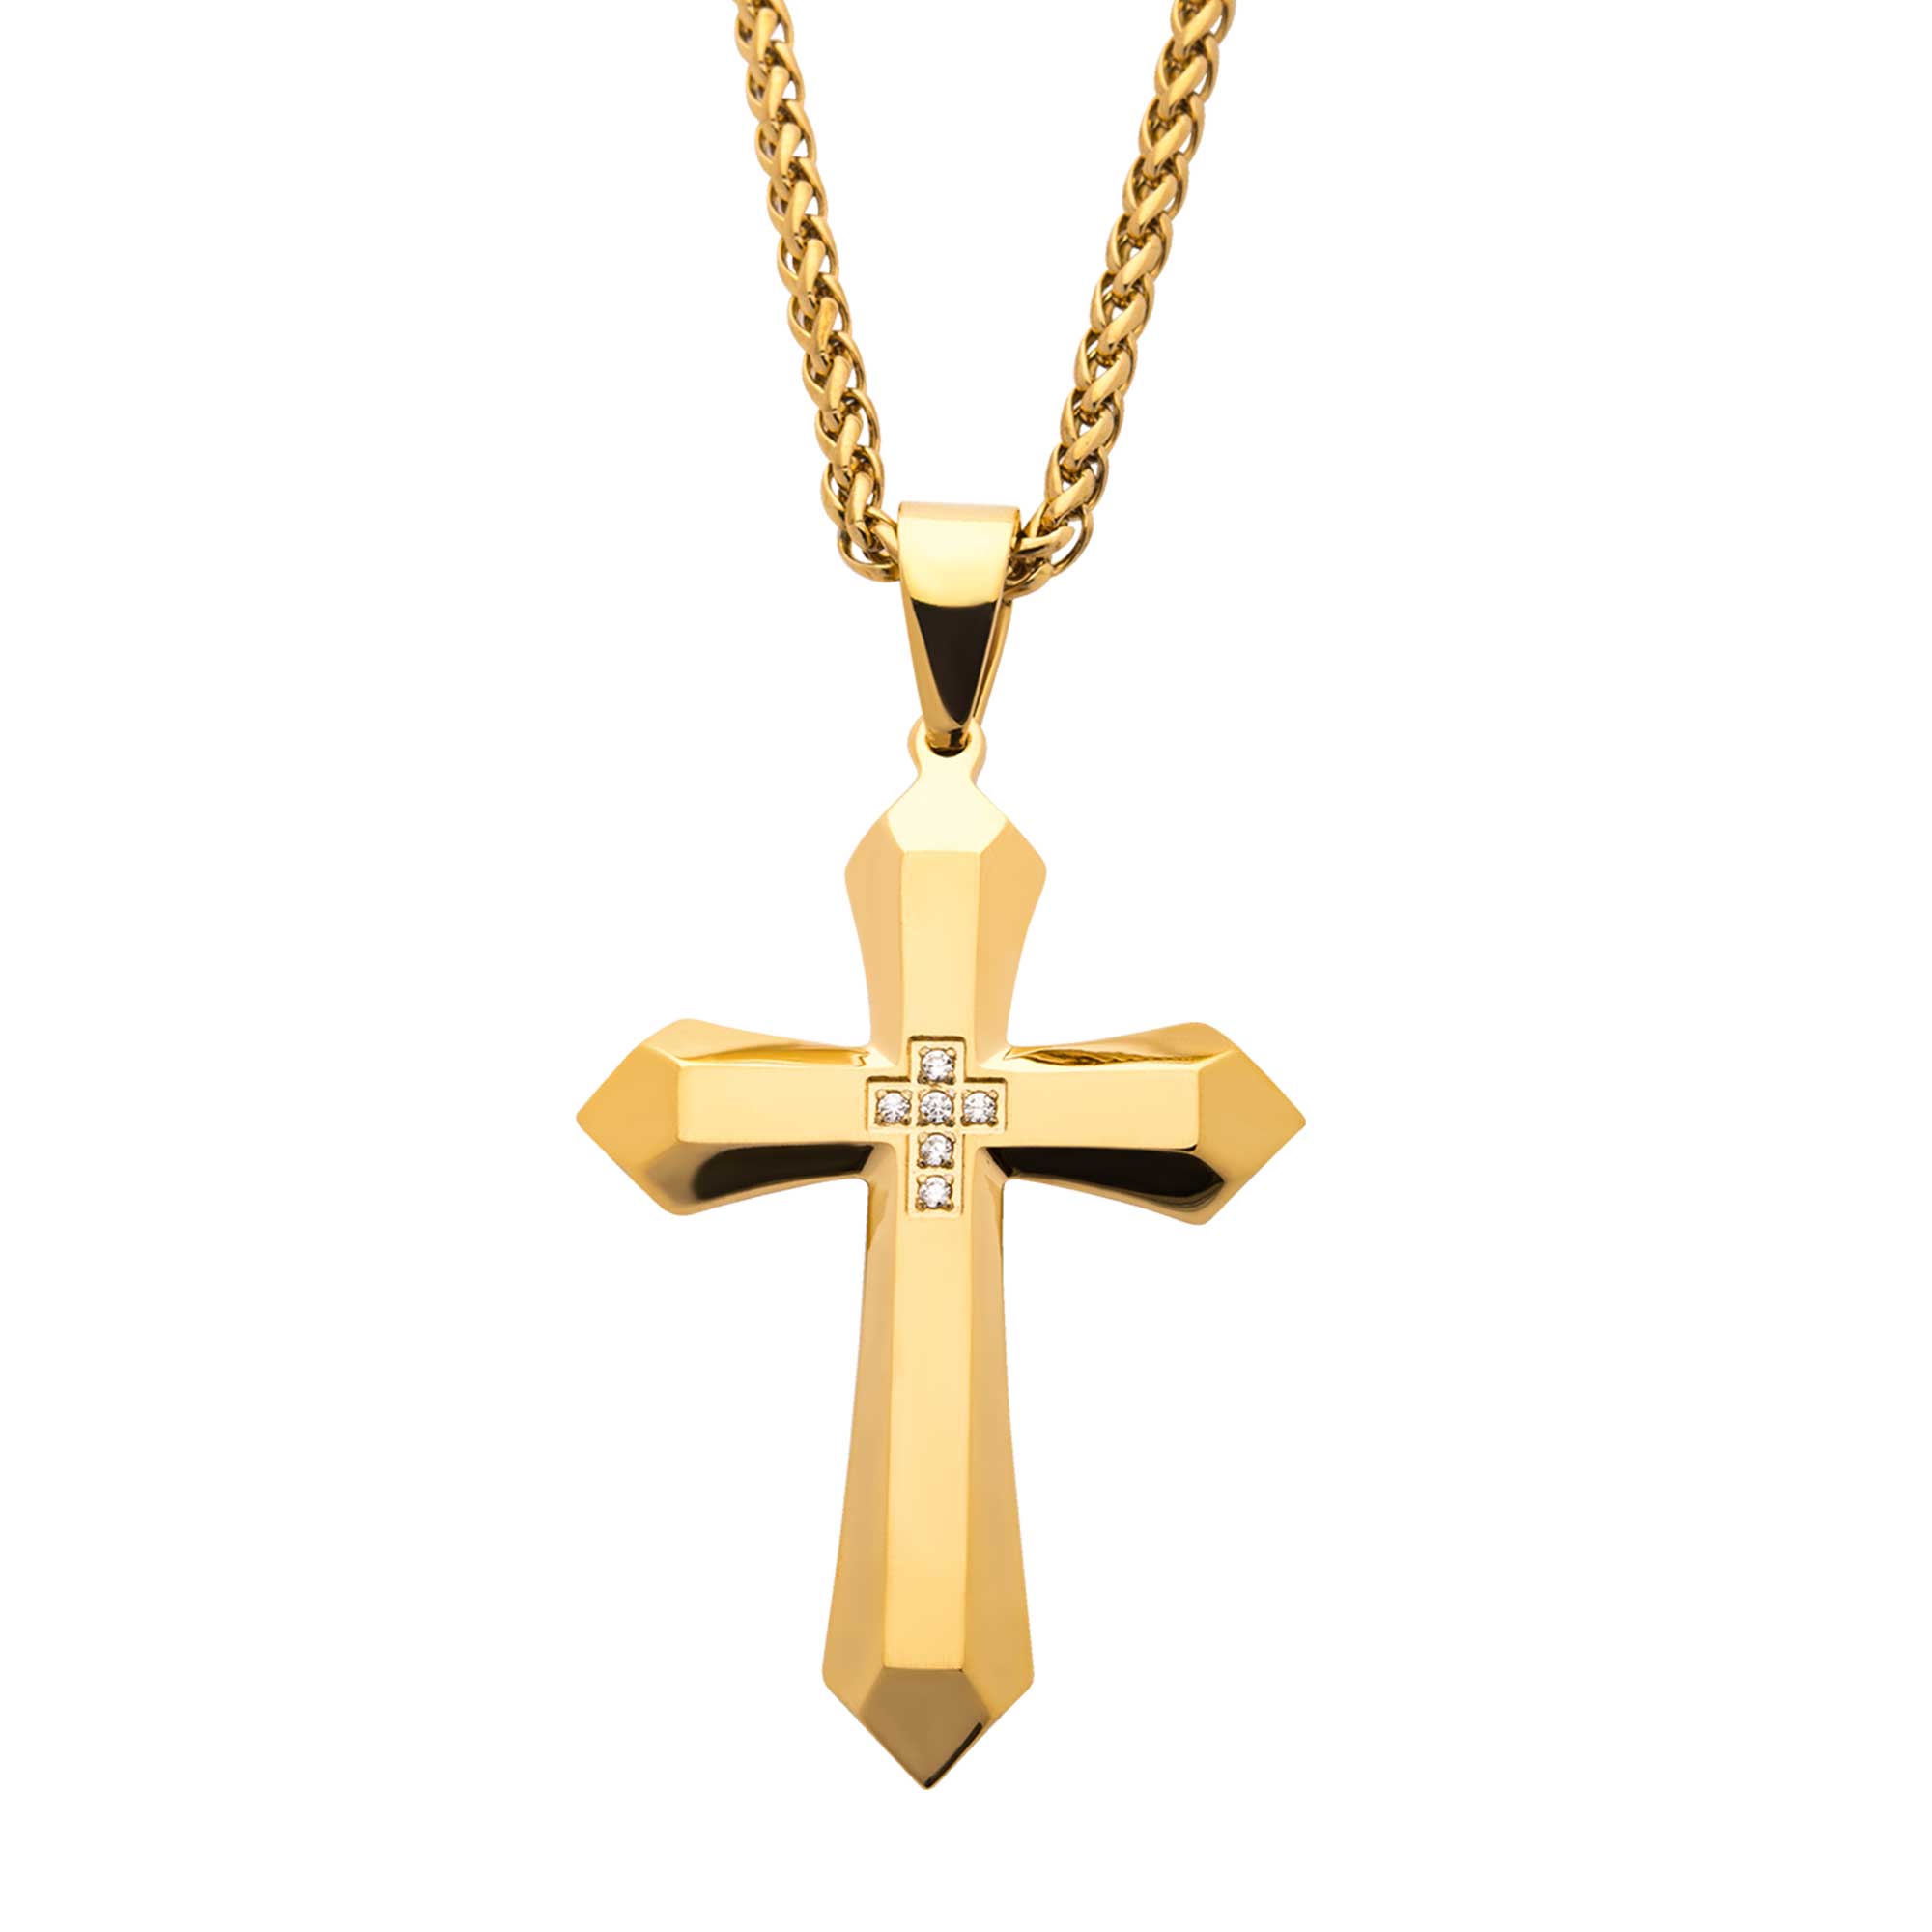 Gold Plated Cross with 6pcs CNC Prong Set Clear CZ Pendant with Gold Plated Wheat Chain P.K. Bennett Jewelers Mundelein, IL